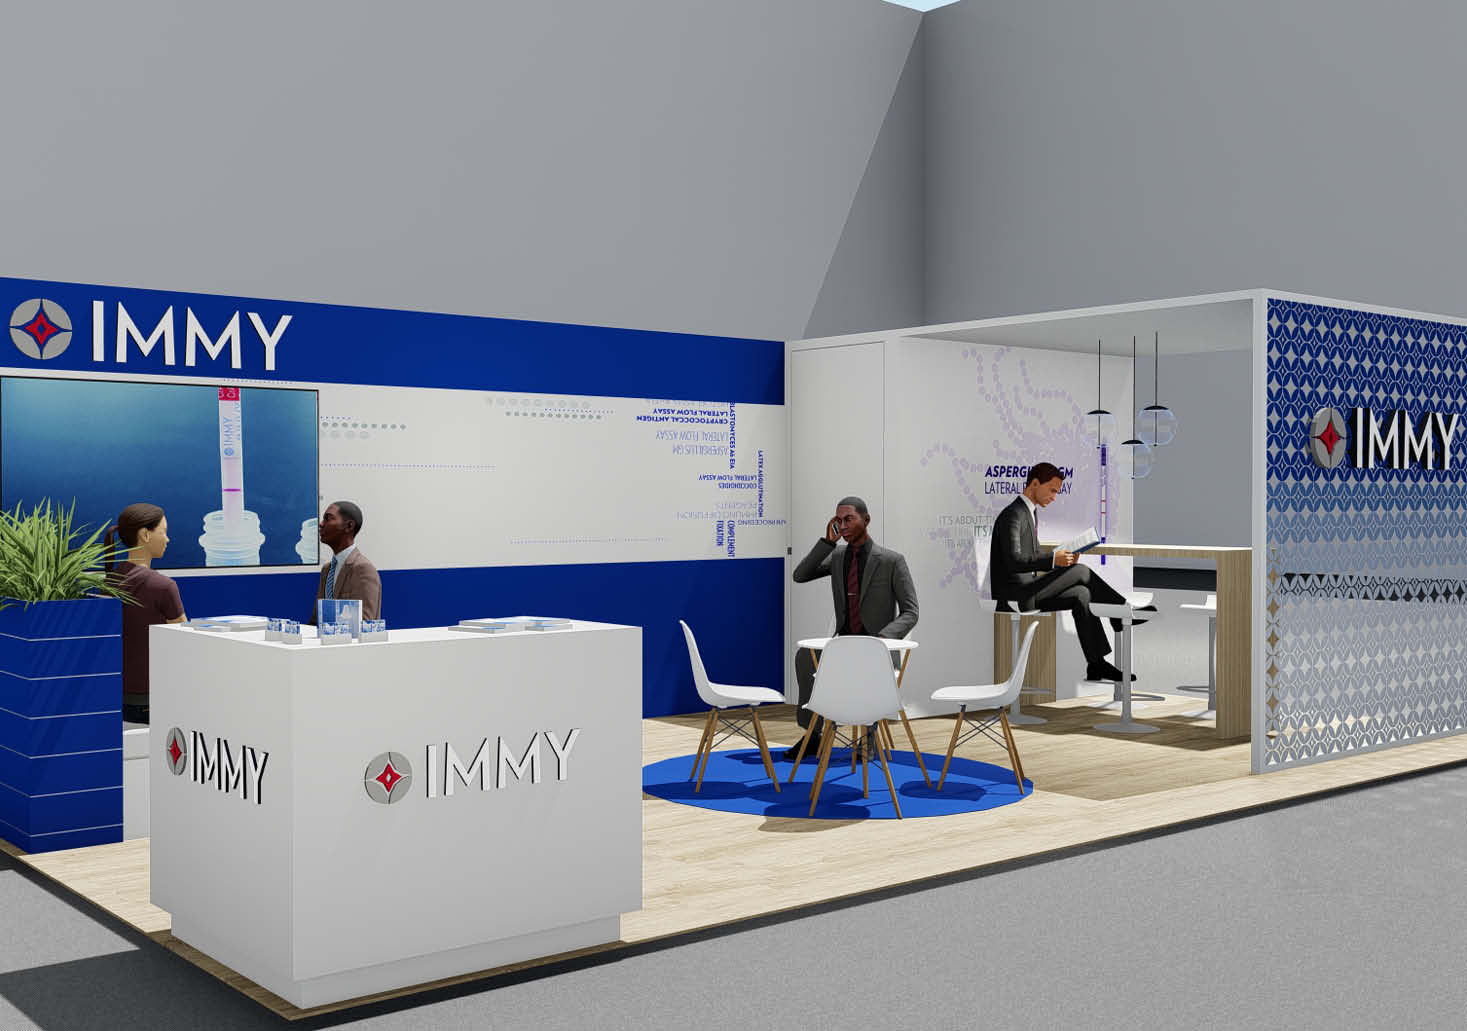 Immy-booth-exhibition-tradeshow-design